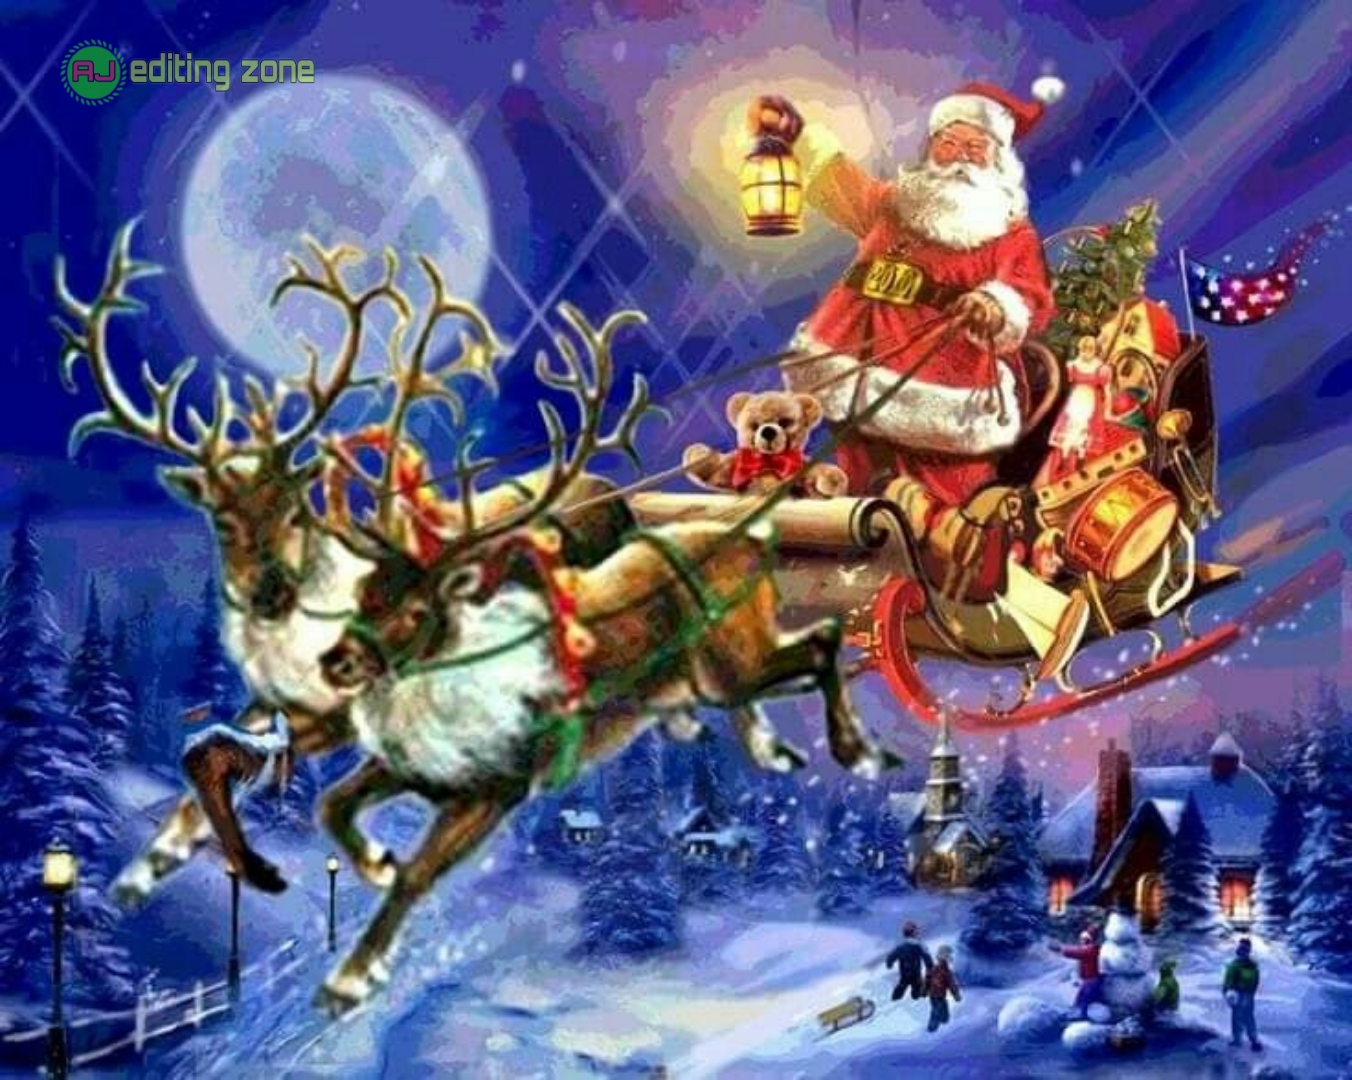 500+ Christmas De Festival Special Photo Editing Background Images for Picsart 2021